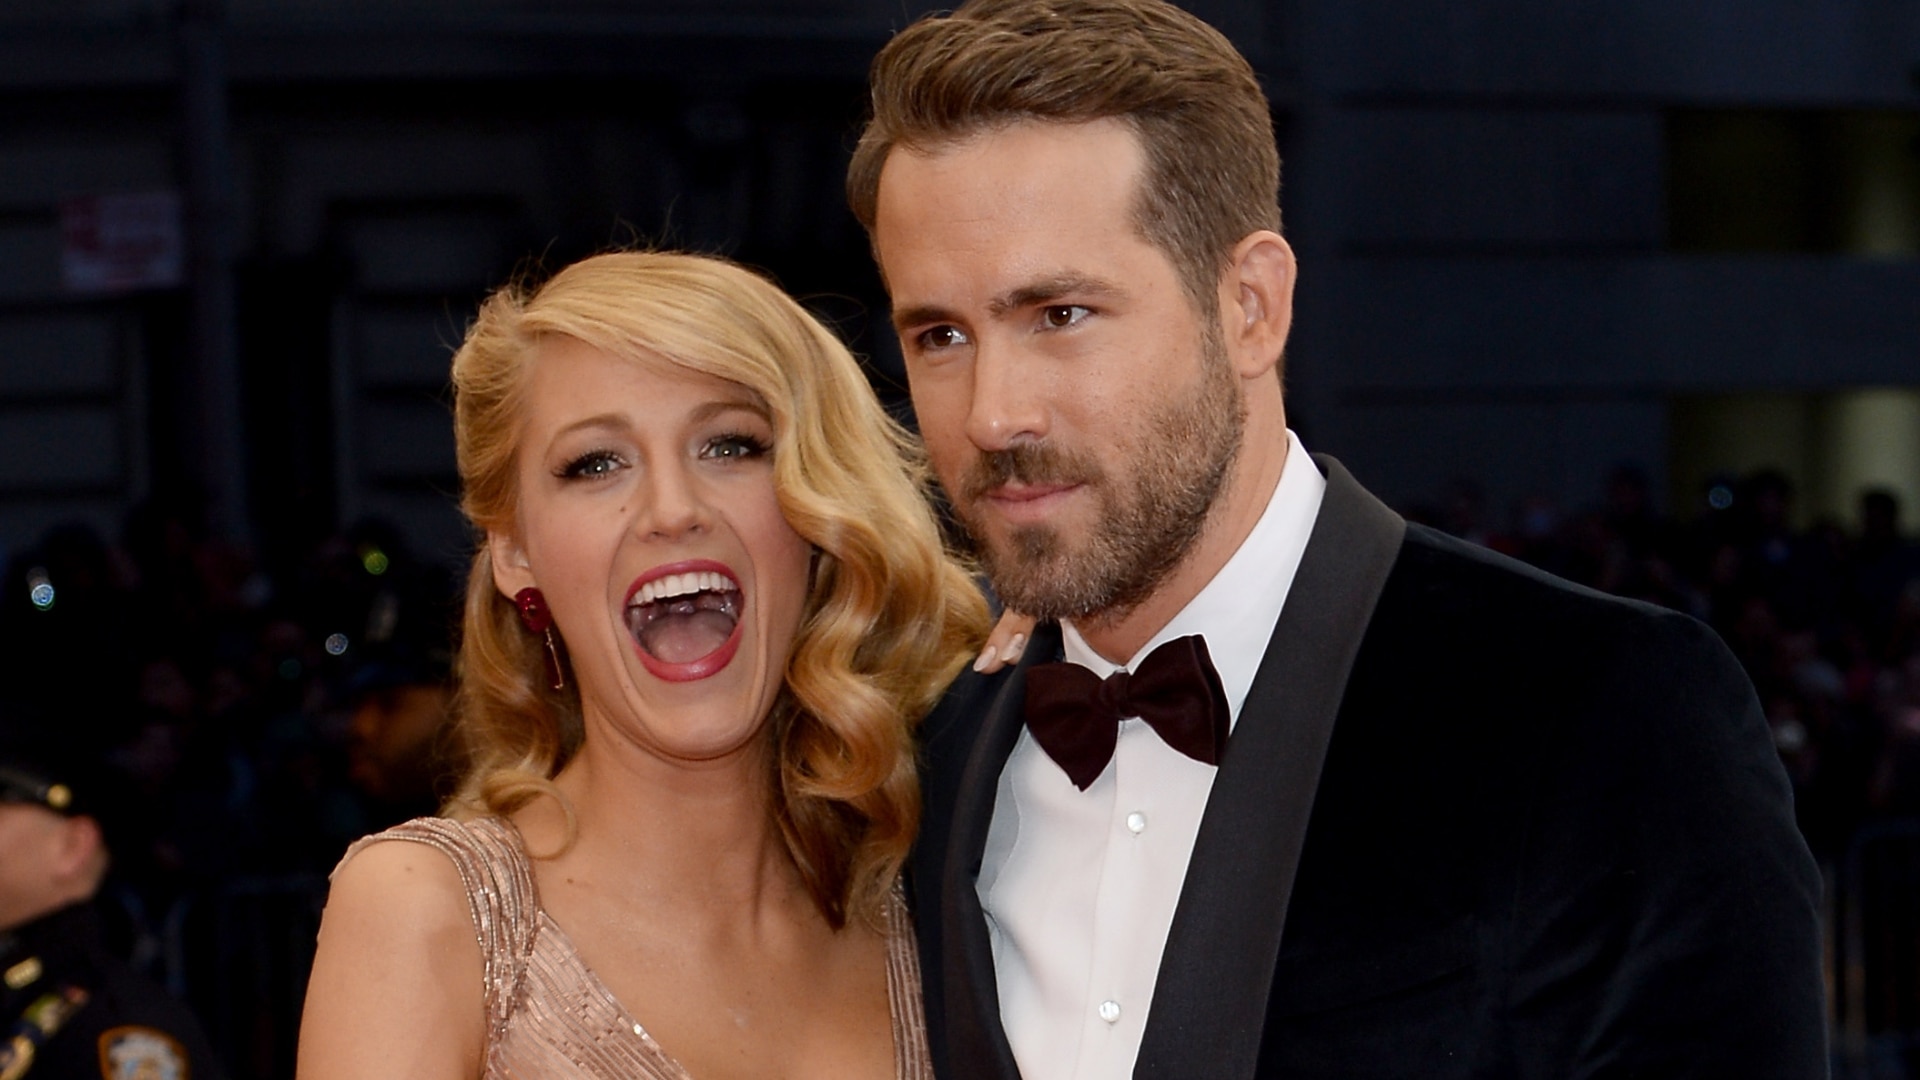 Access Hollywood Season 2019 Episode 0 Ryan Reynolds Shares Rare Snap With Wife Blake Lively In New Orleans pic image